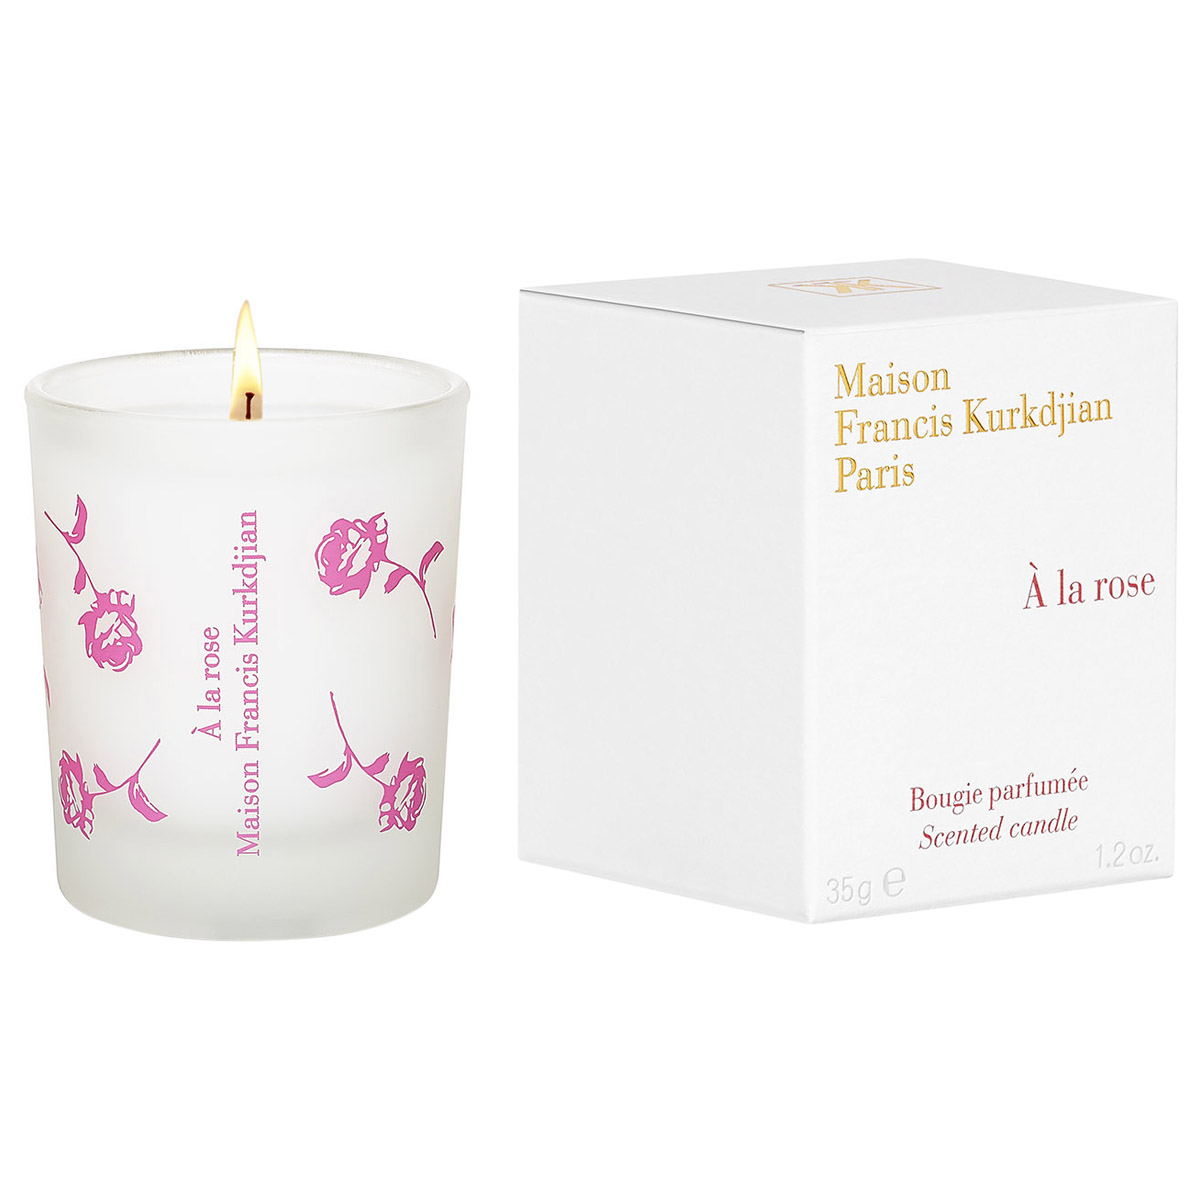 A la rose scented candle 35gr